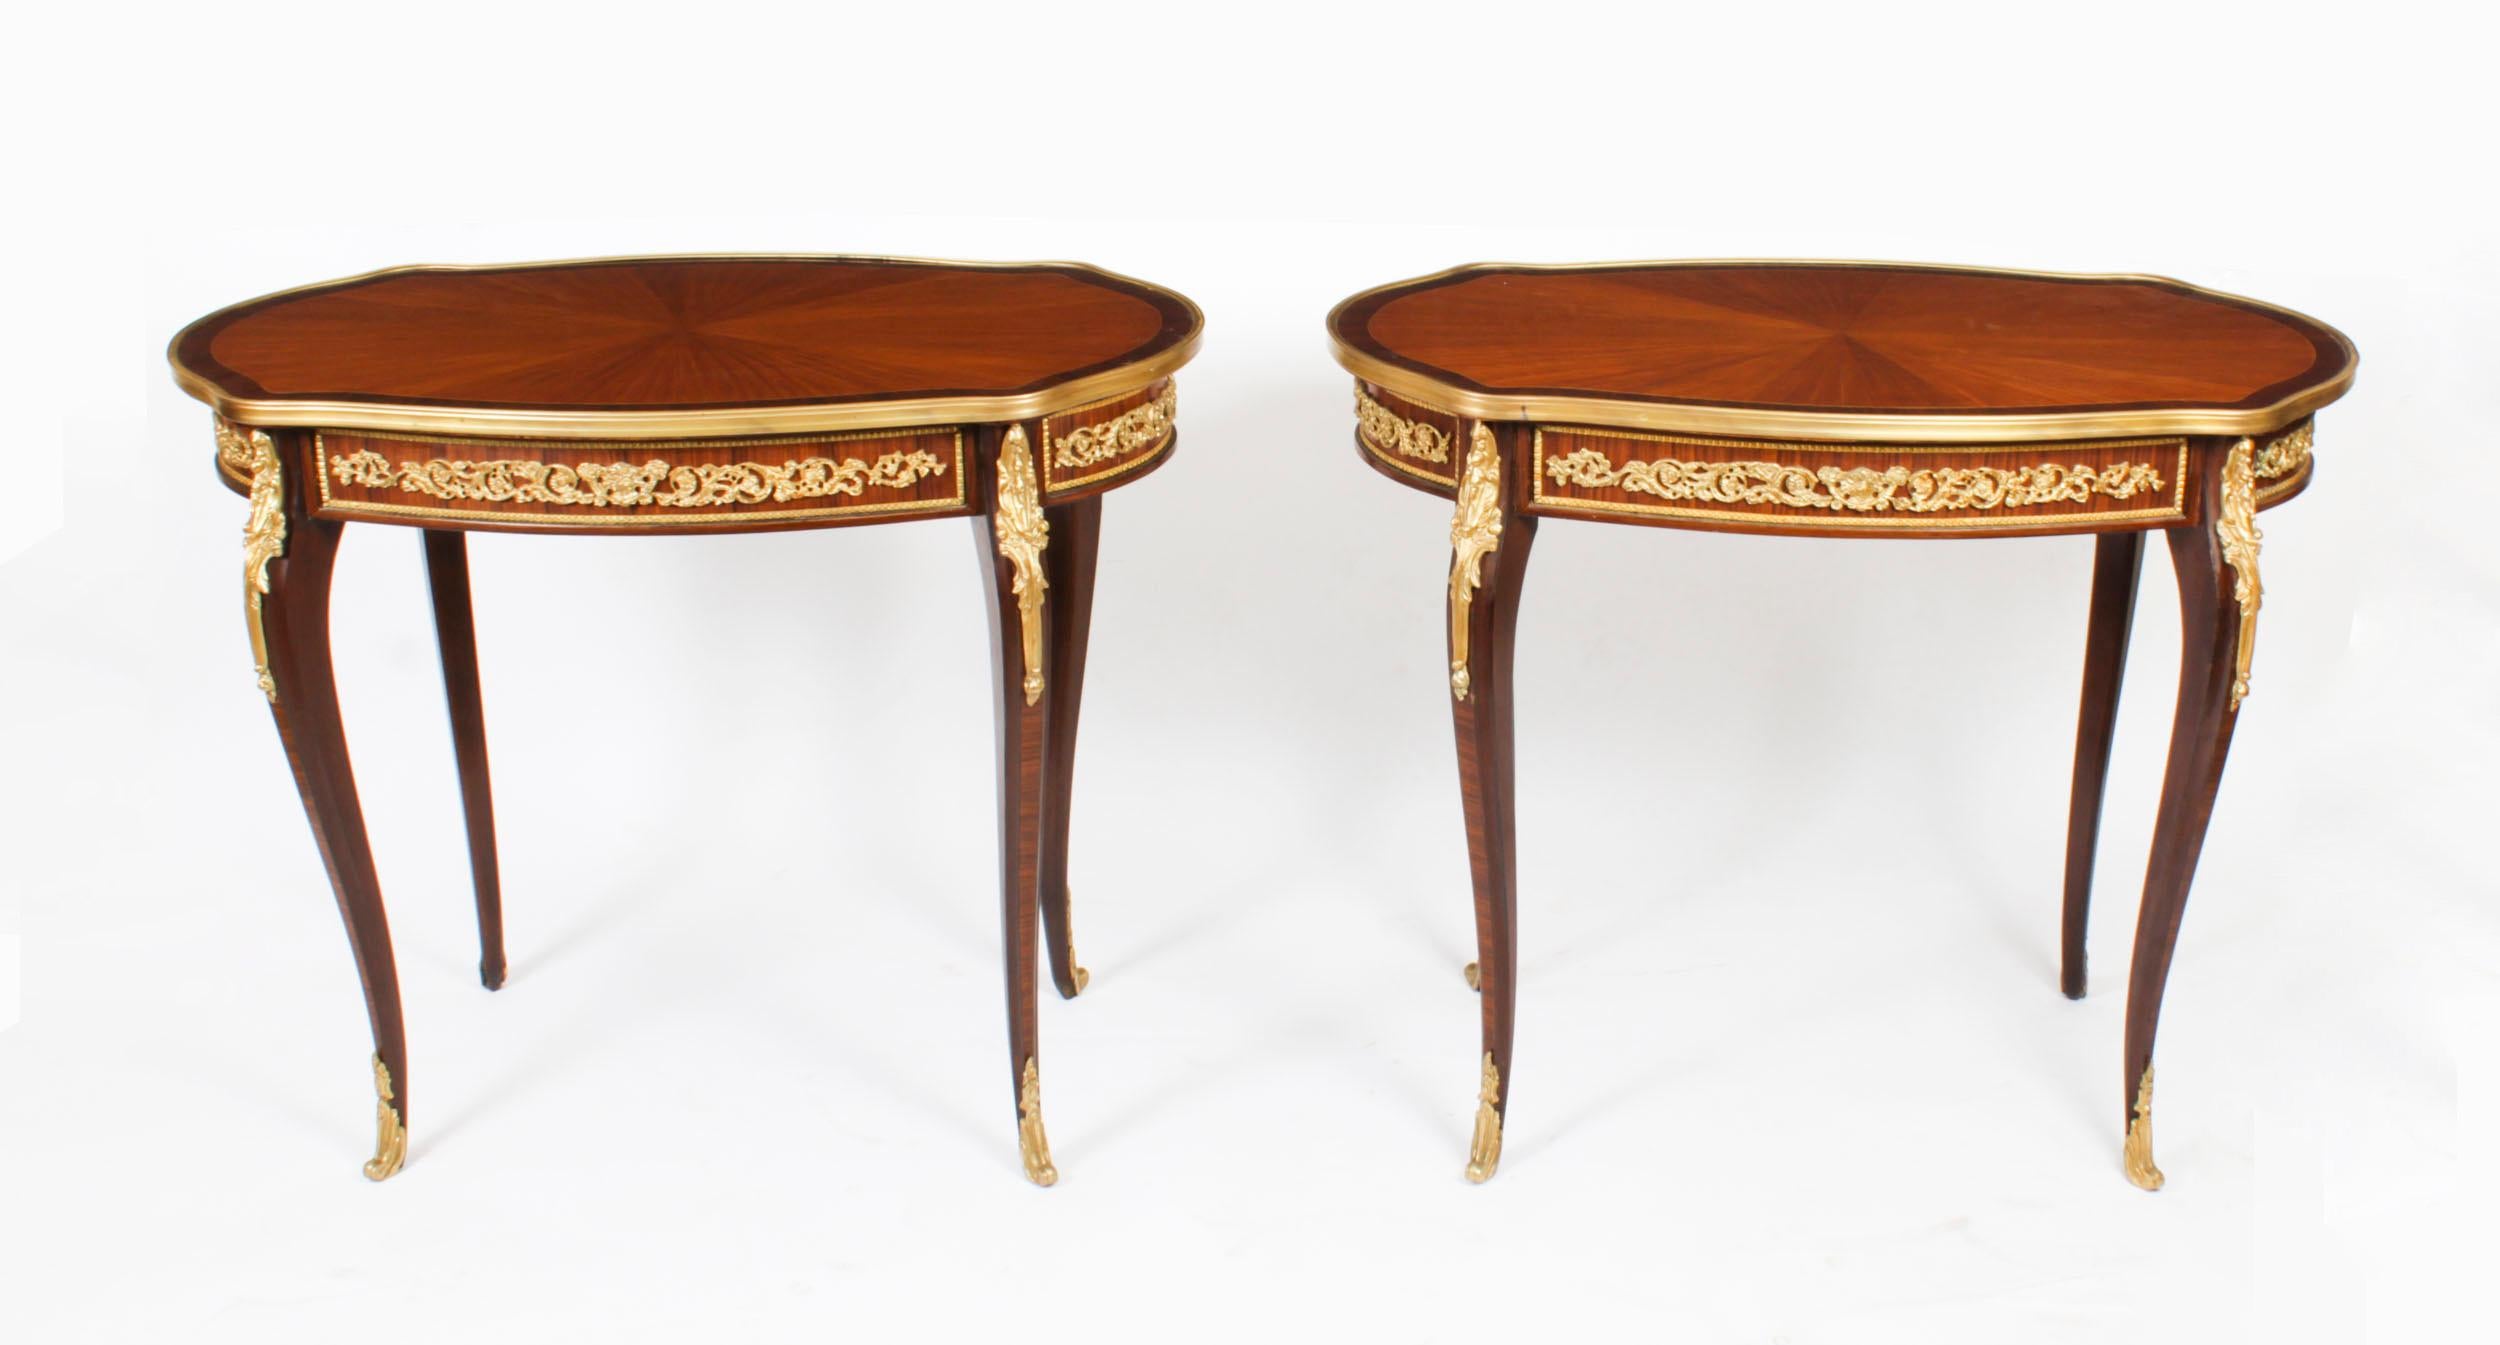 This is a beautiful pair of vintage French Louis Revival ormolu mounted side tables, Mid-20th Century in date.

The oval shaped tables are framed with decorative ormolu borders and the tops feature satinwood starbursts with crossbanded borders.